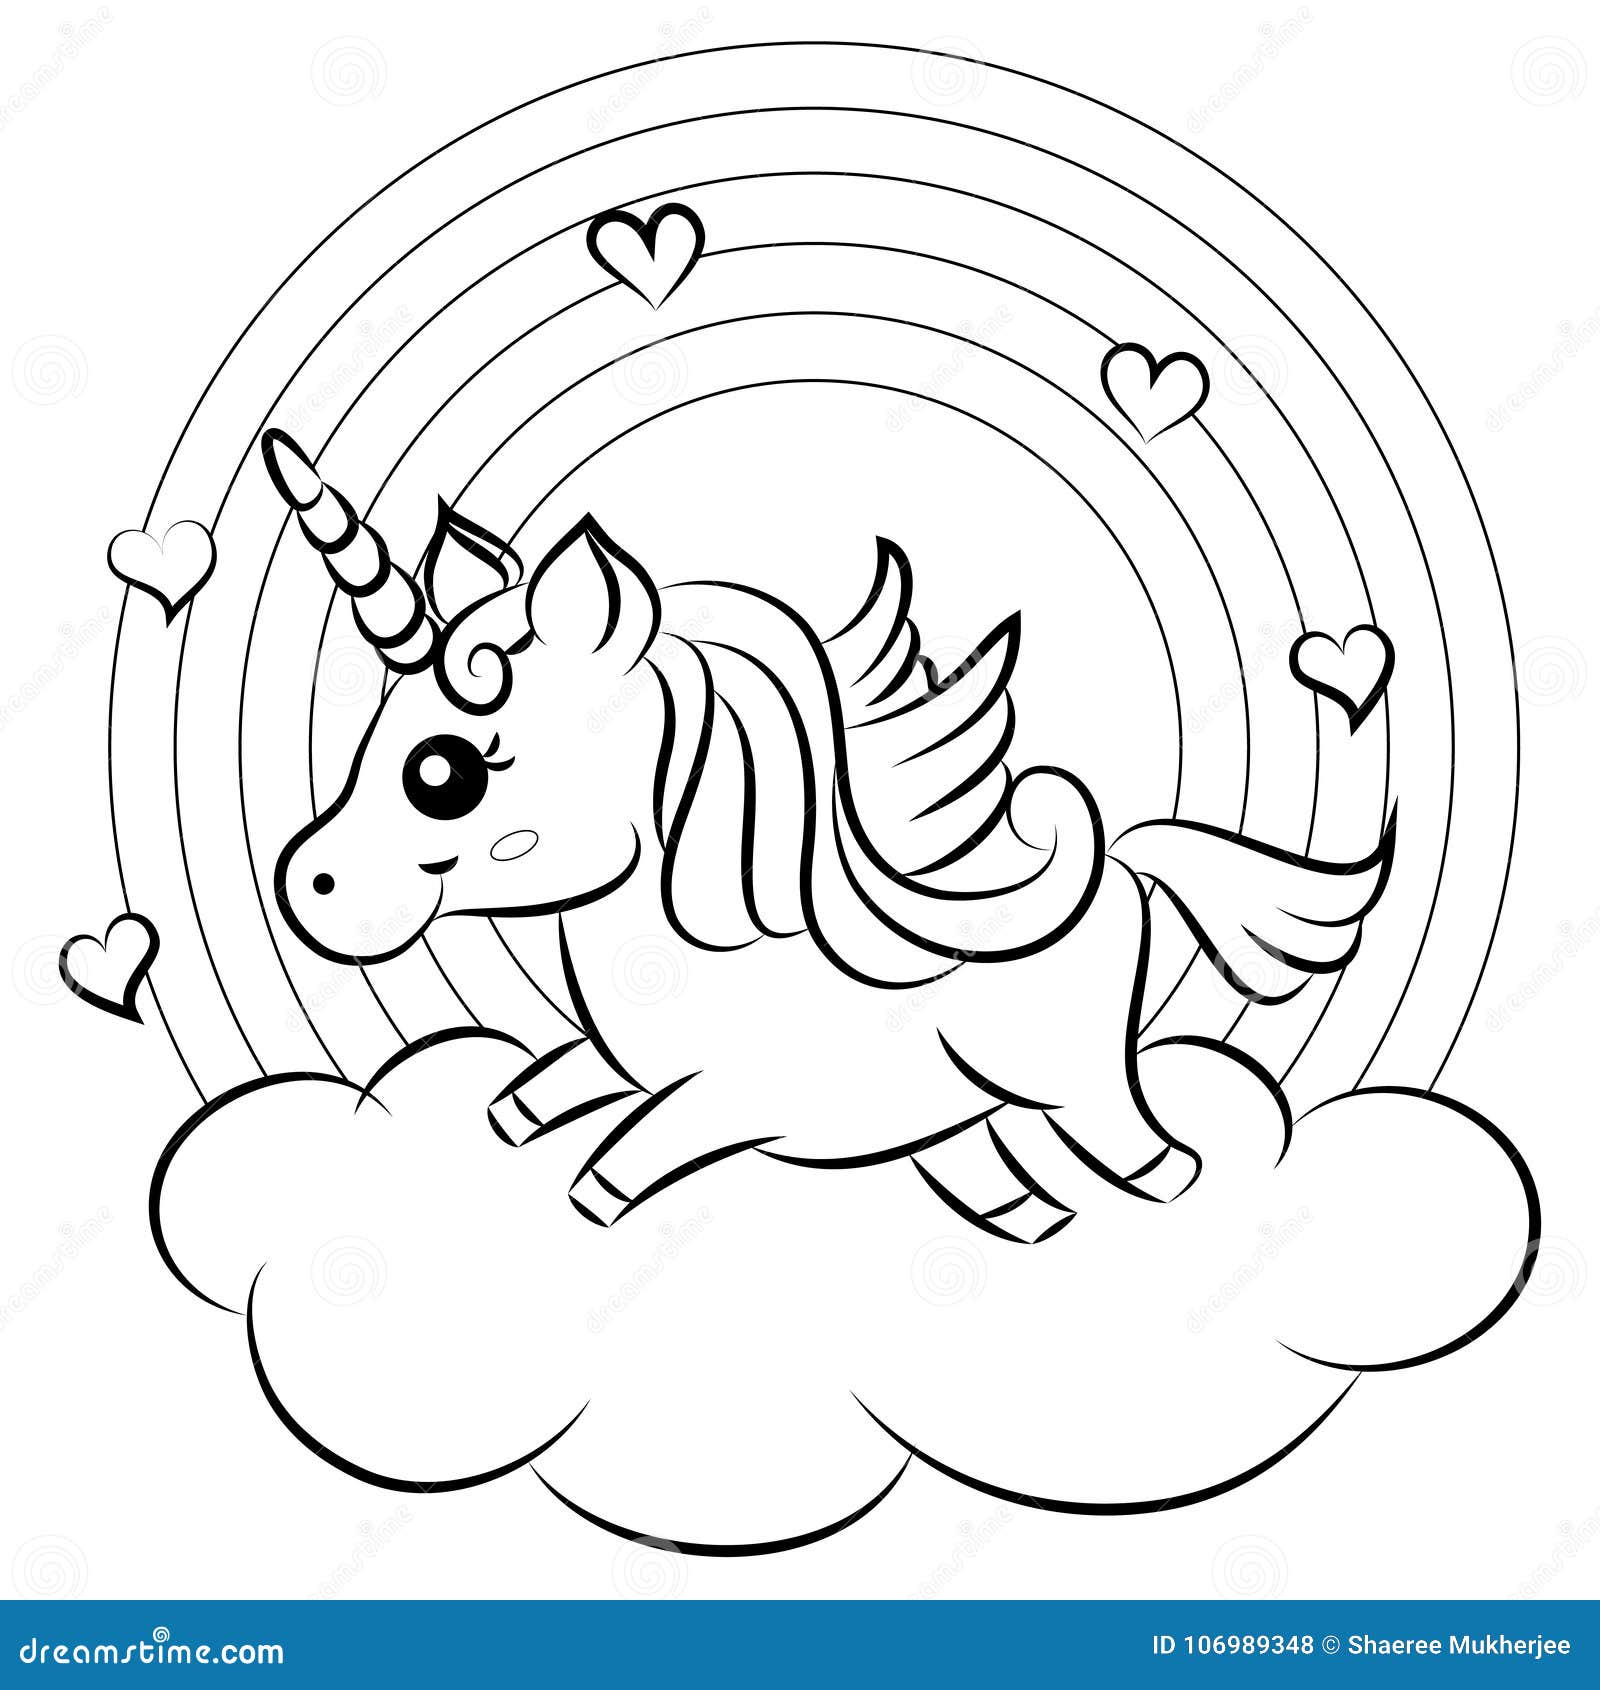 Cute Cartoon Vector Unicorn With Rainbow Coloring Page Stock Vector - Illustration of running ...